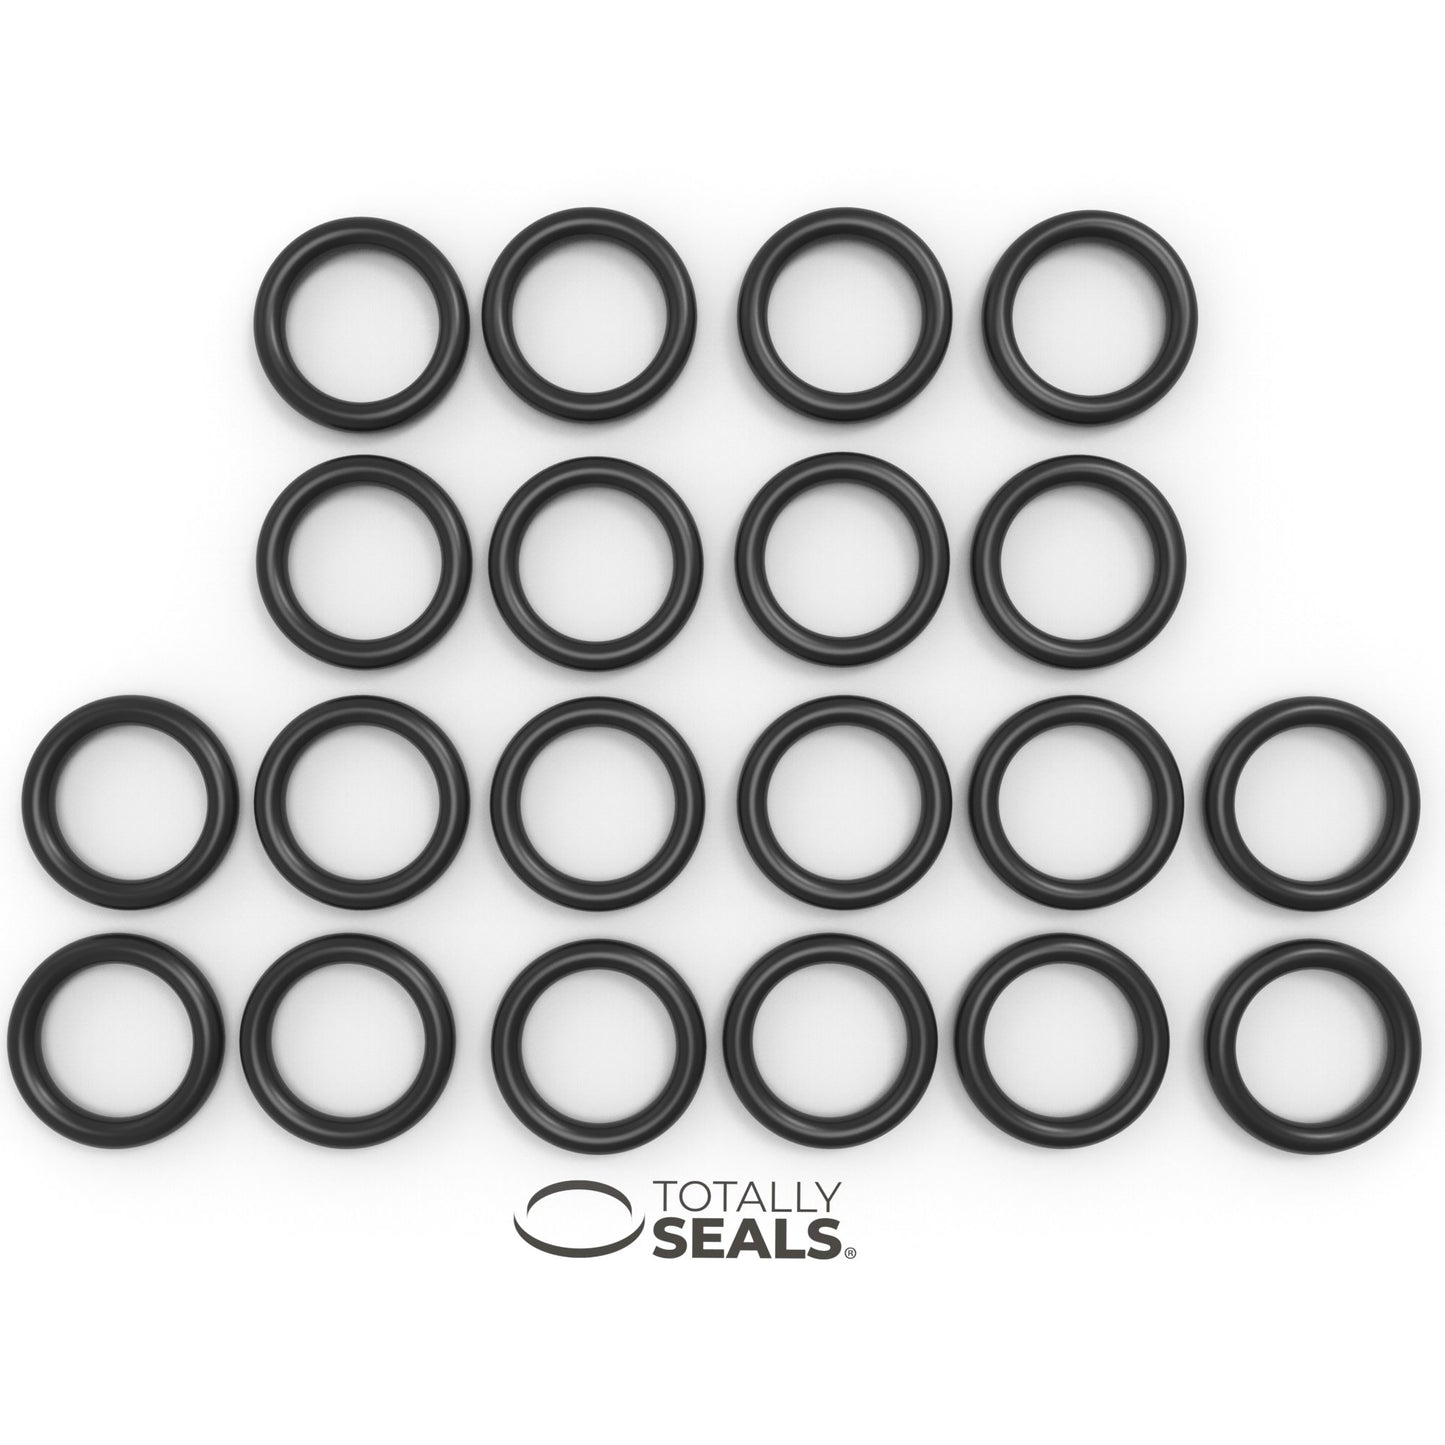 33mm x 3mm (39mm OD) Nitrile O-Rings - Totally Seals®